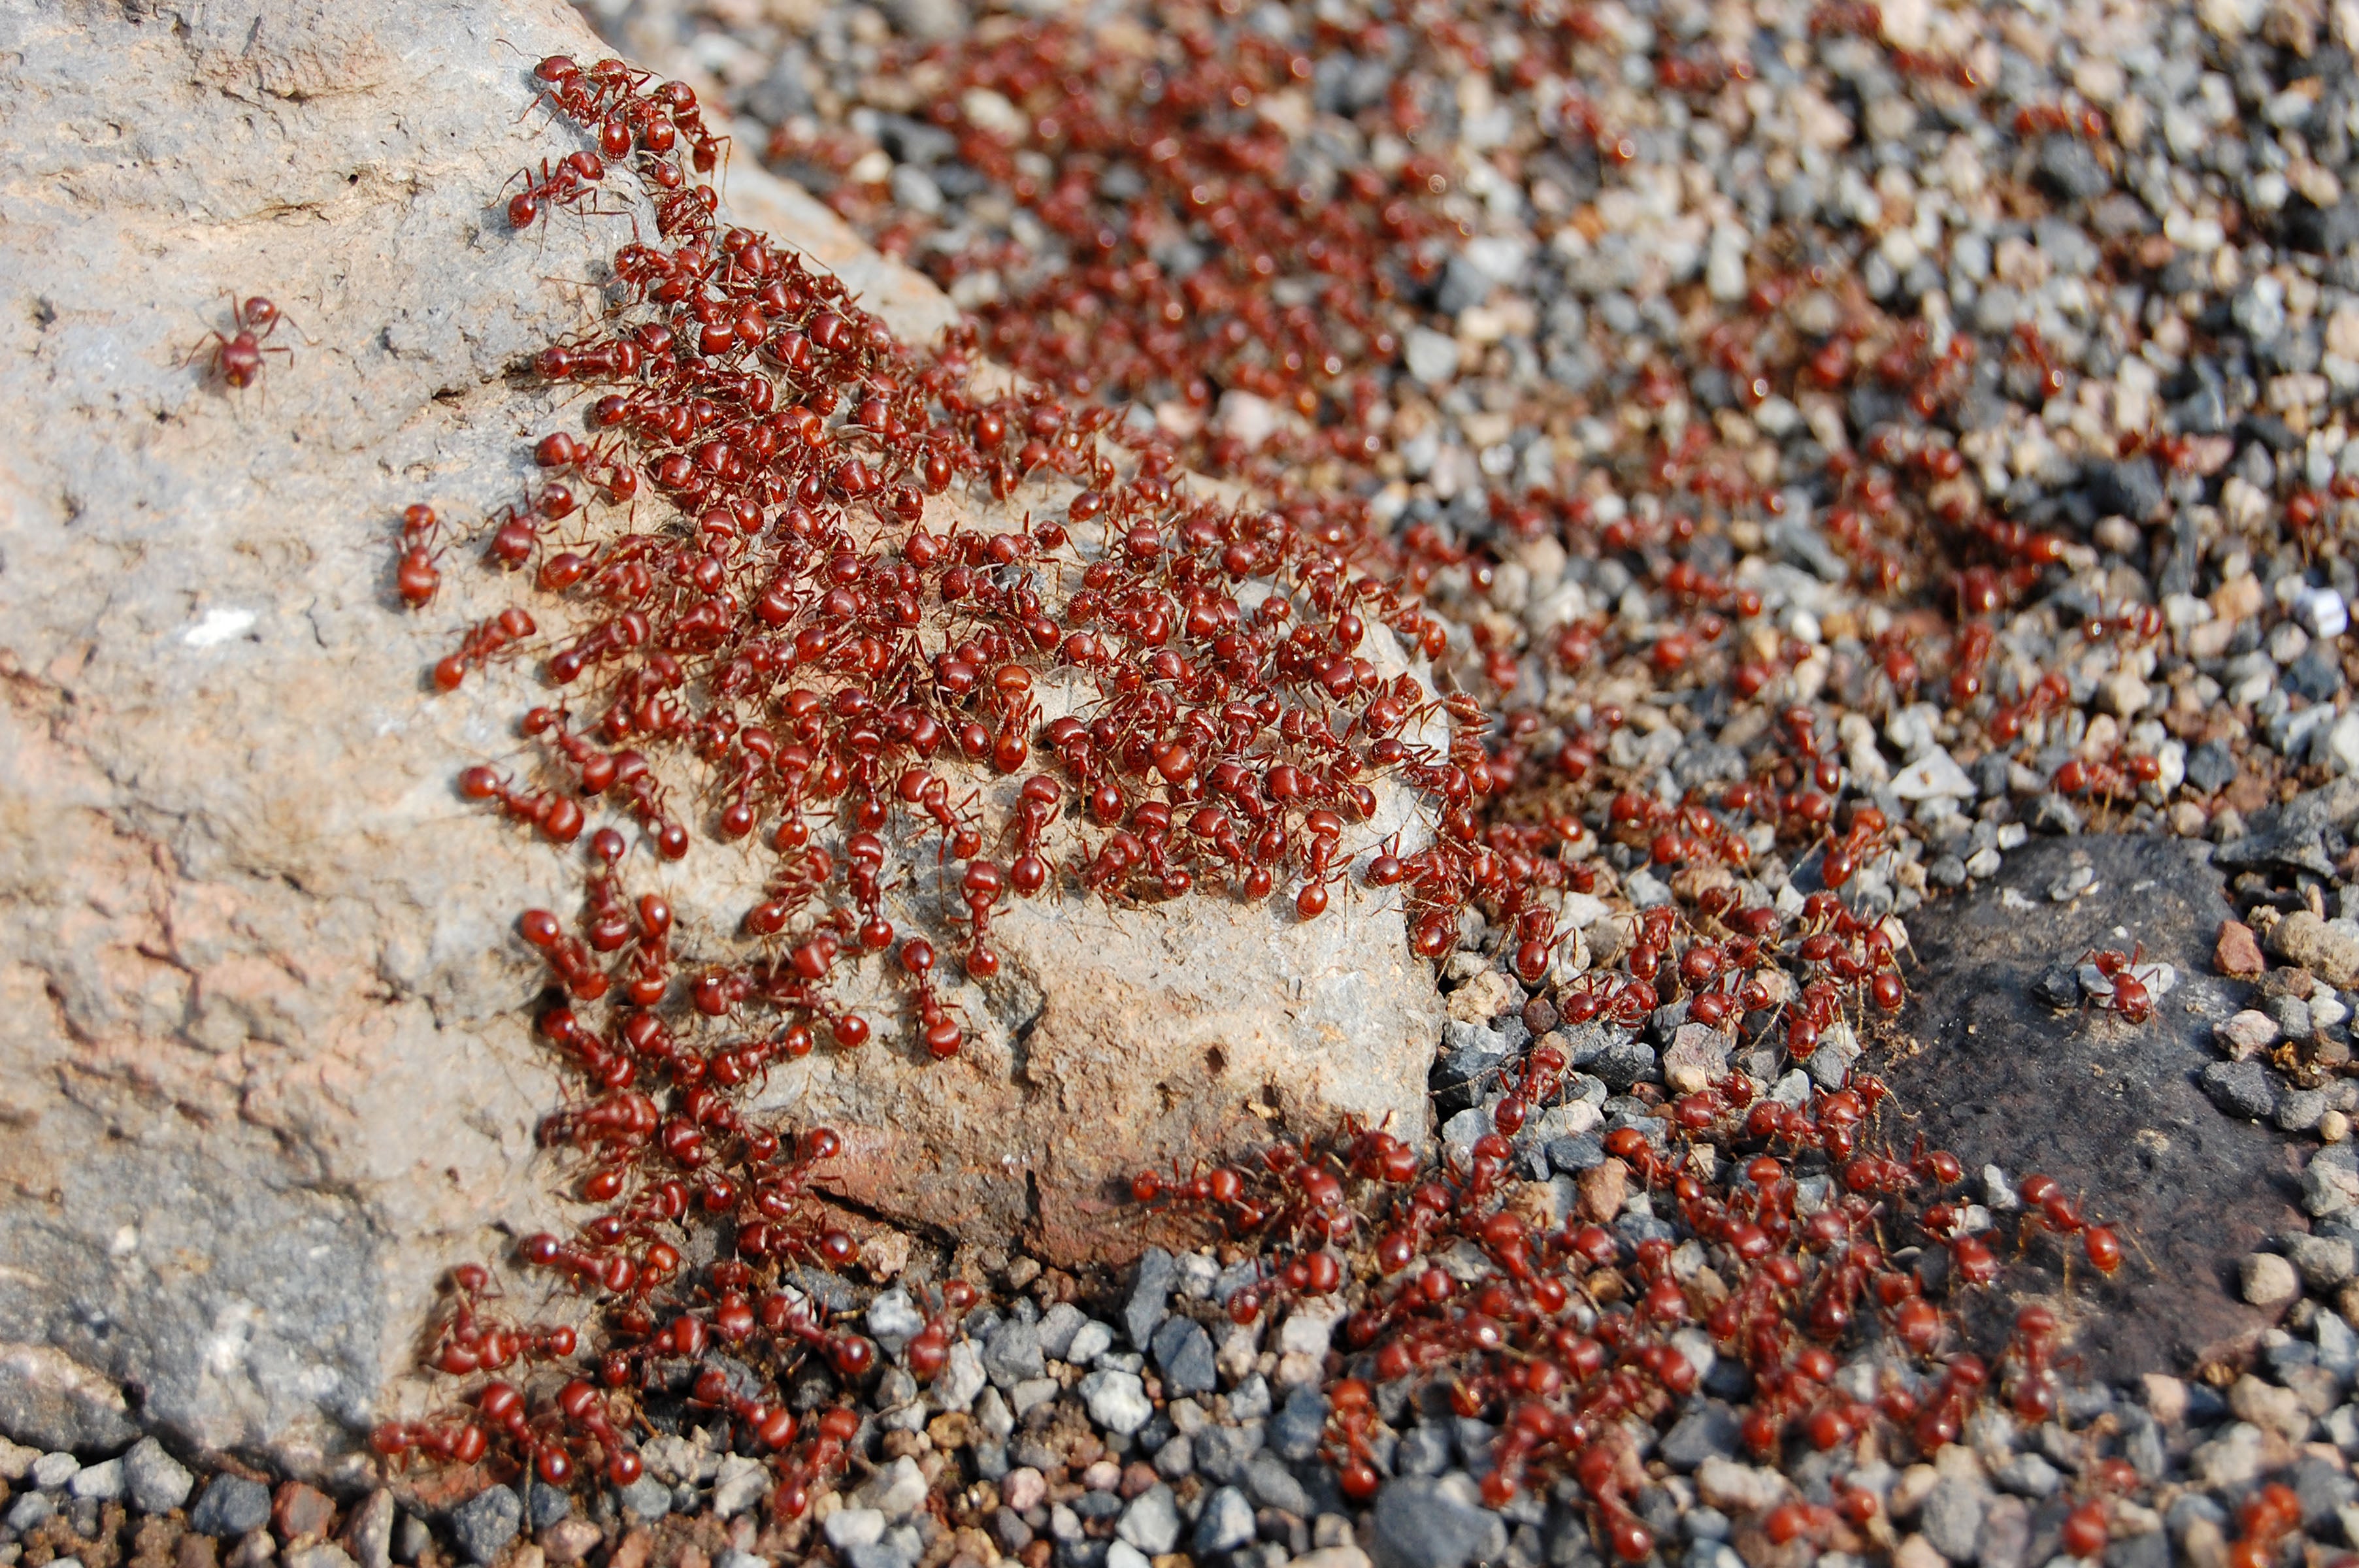 Fire Ant Identification & Prevention Guide - EnSec Pest & Lawn